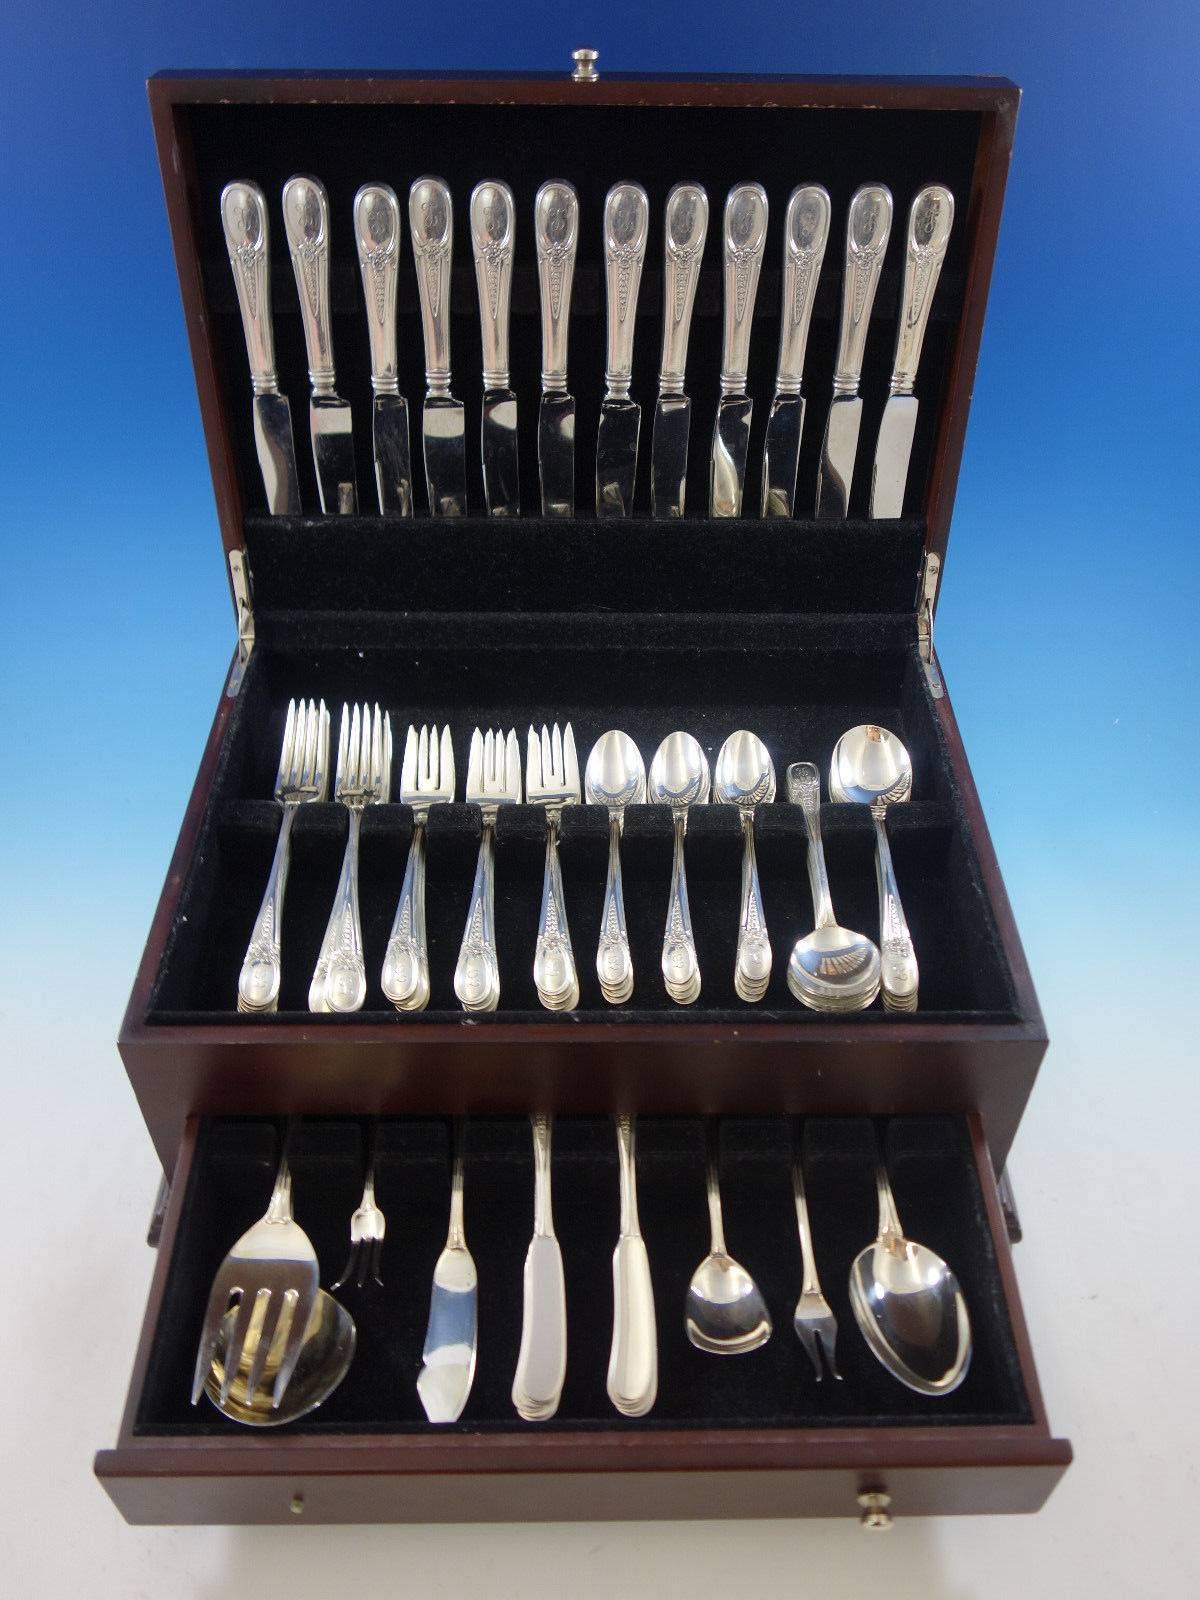 Flowered antique by Blackinton (stamped Georg Jensen USA) sterling silver flatware set, 79 pieces. This set includes: 

12 knives, 9